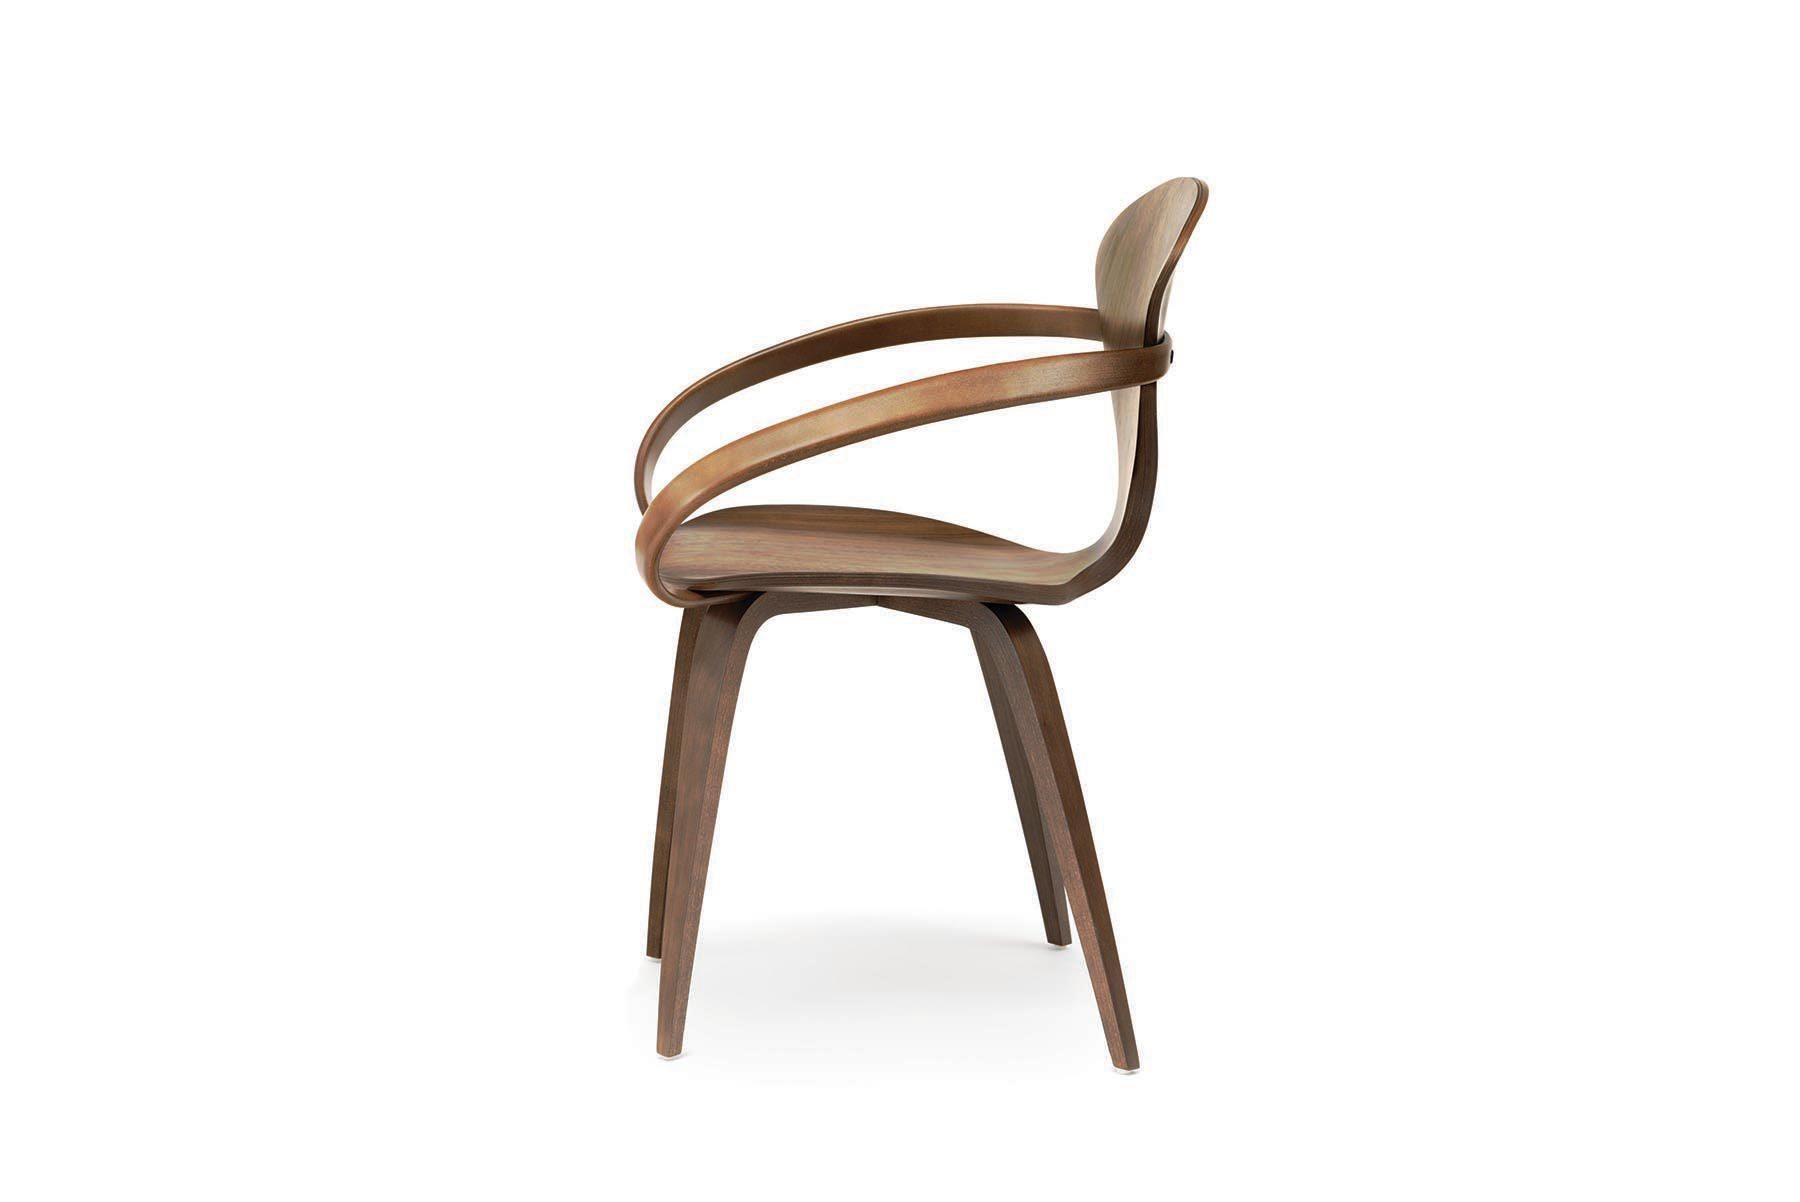 Originally introduced in 1958, the iconic molded plywood armchair by Norman Cherner is found in collections worldwide. Reissued in exacting detail from the original drawings and molds, the armchair elegantly combines a unique molded plywood shell of